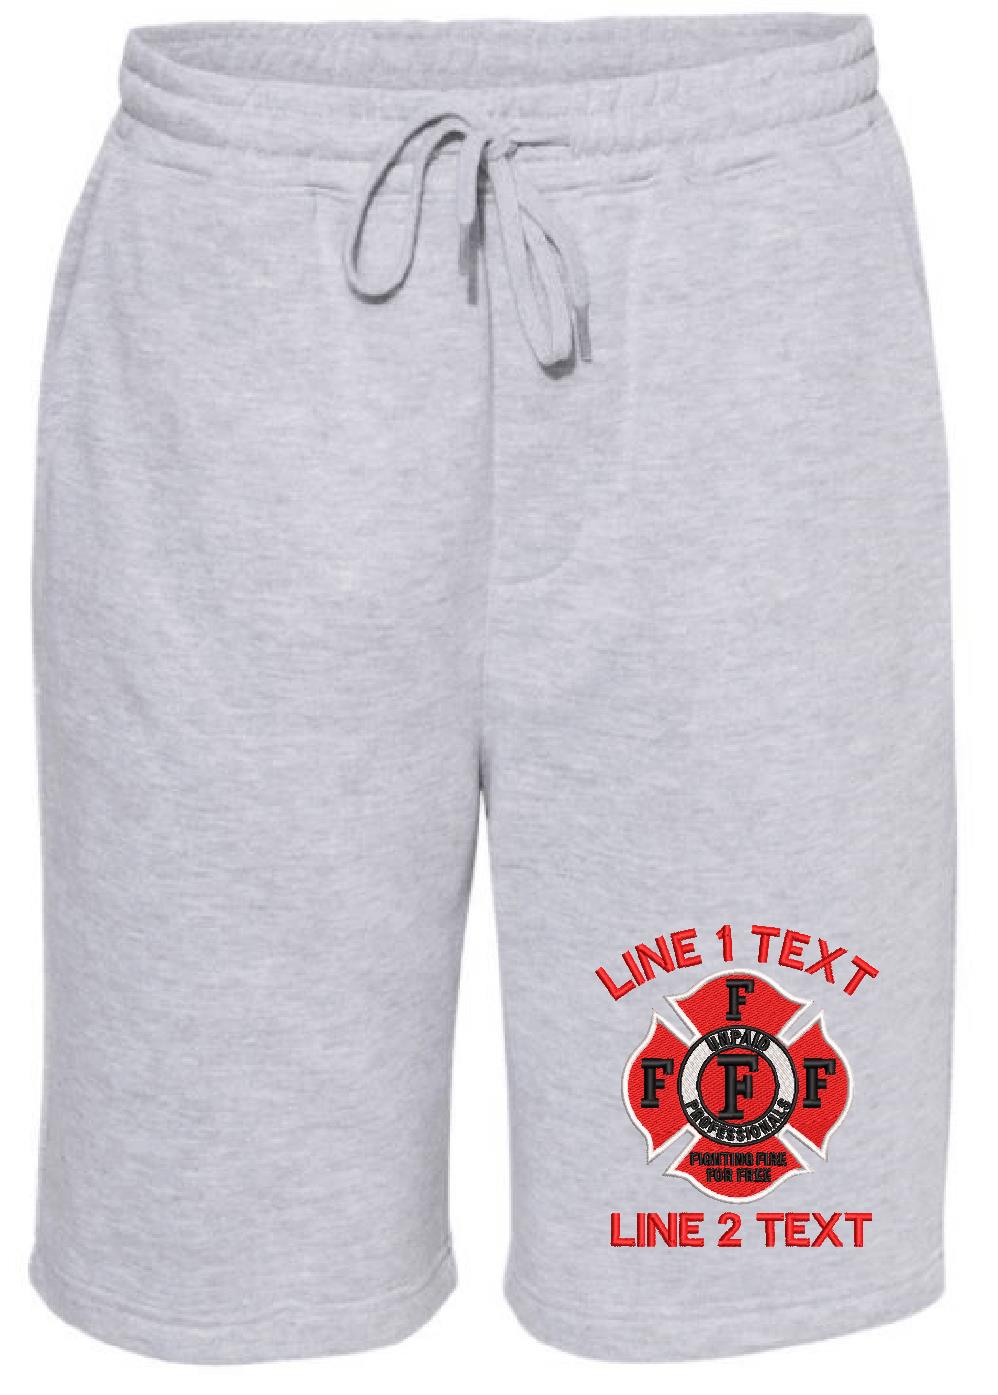 Fighting Fire for Free Custom Embroidered Fleece Shorts - Powercall Sirens LLC